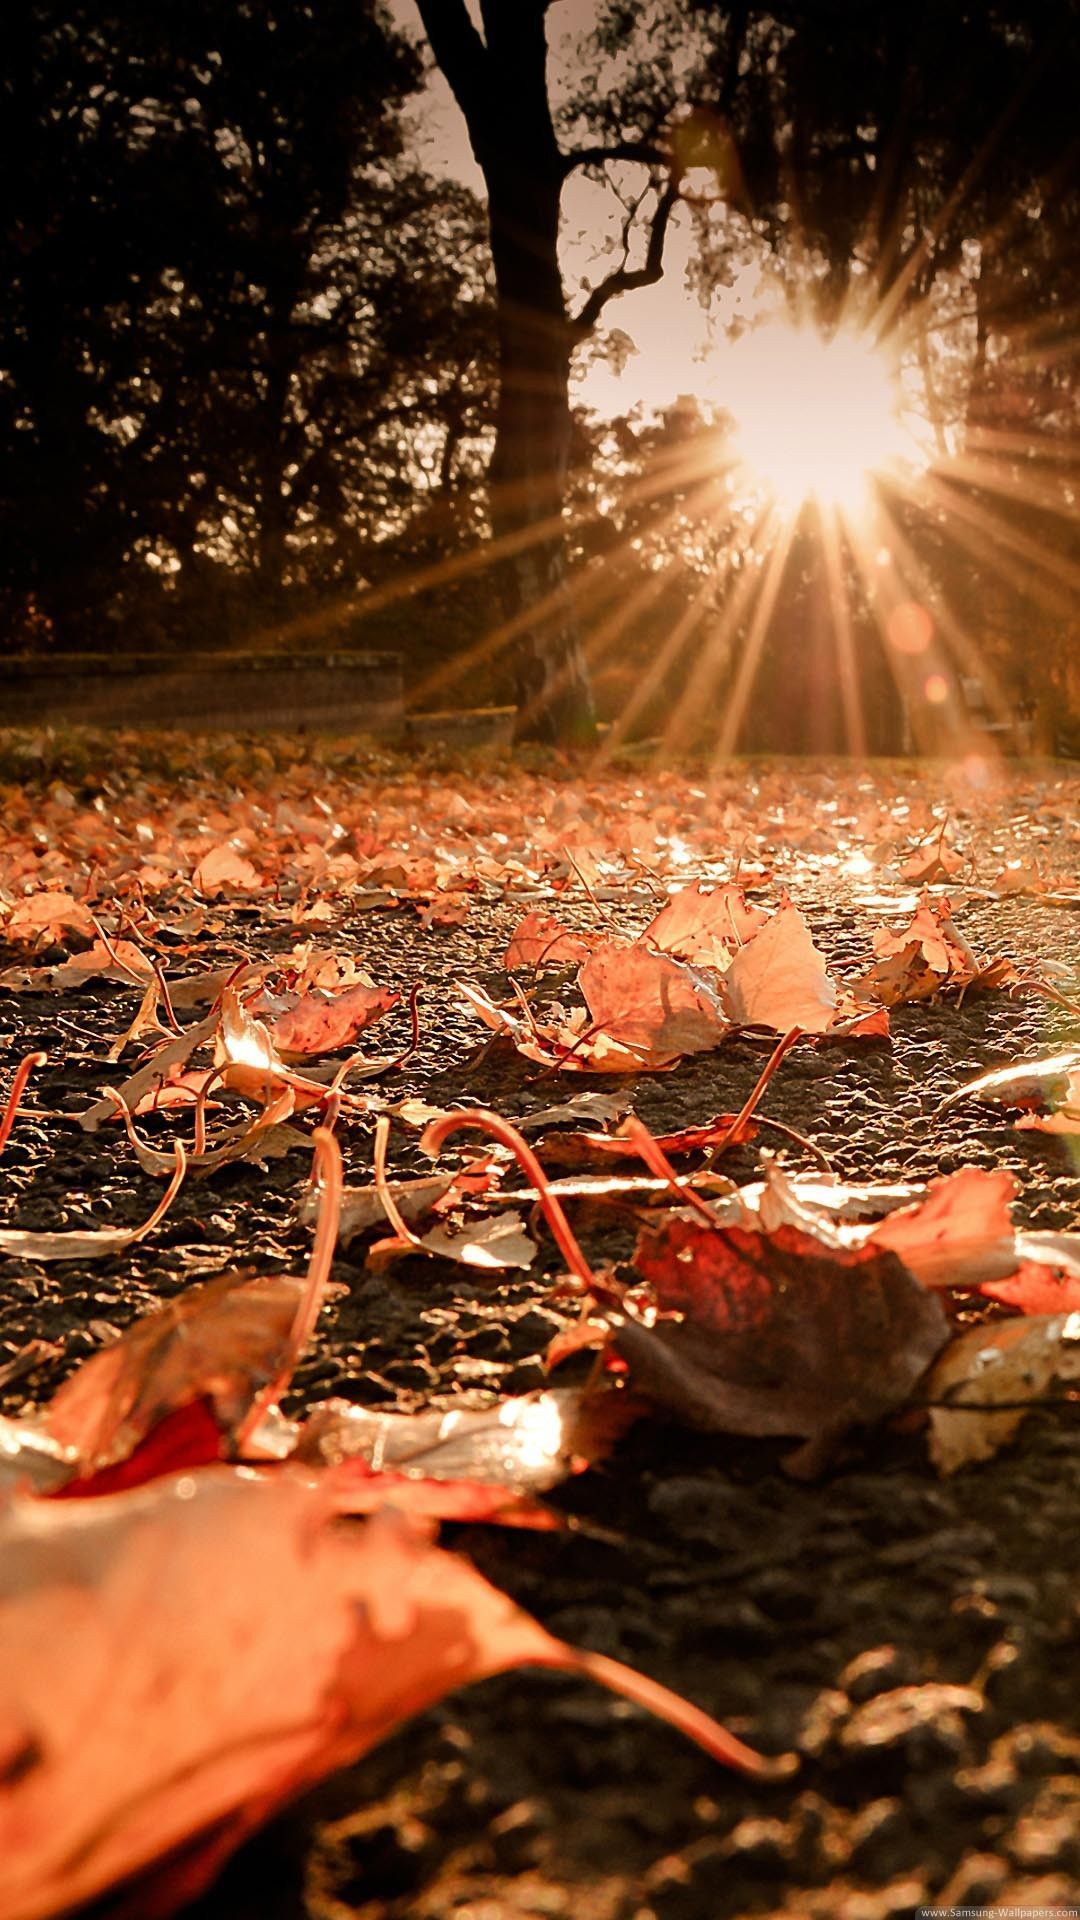 Nature iPhone 6 Plus Wallpaper Leaves On The Ground Sunset iPhone 6 Plus HD Wallpaper. Autumn leaves wallpaper, Fall wallpaper, iPhone wallpaper fall